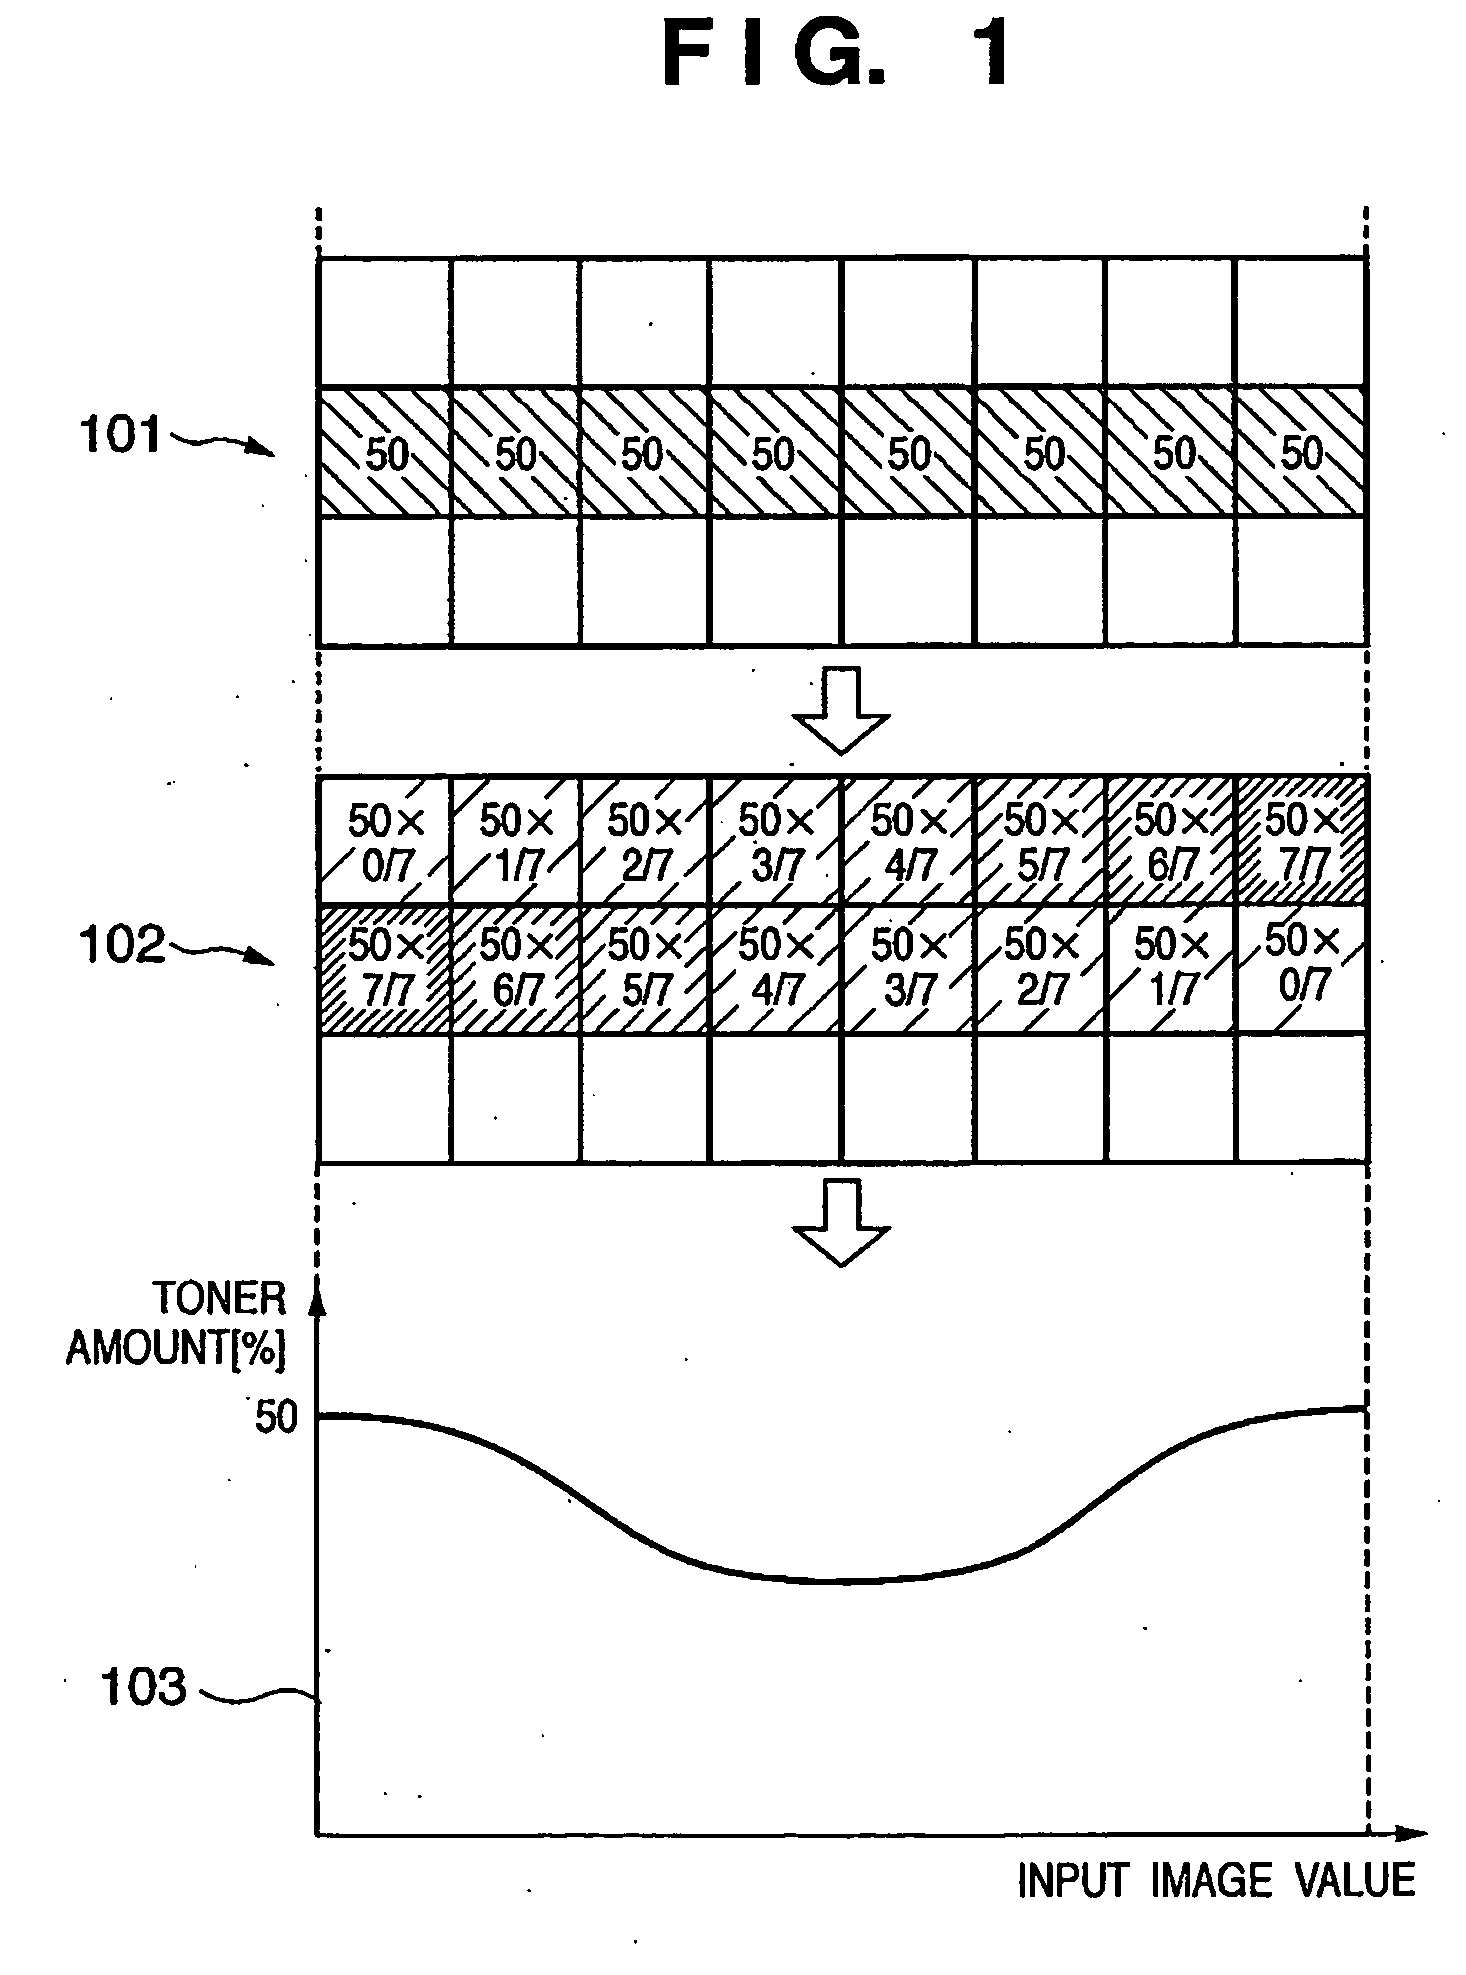 Image forming apparatus and its control method